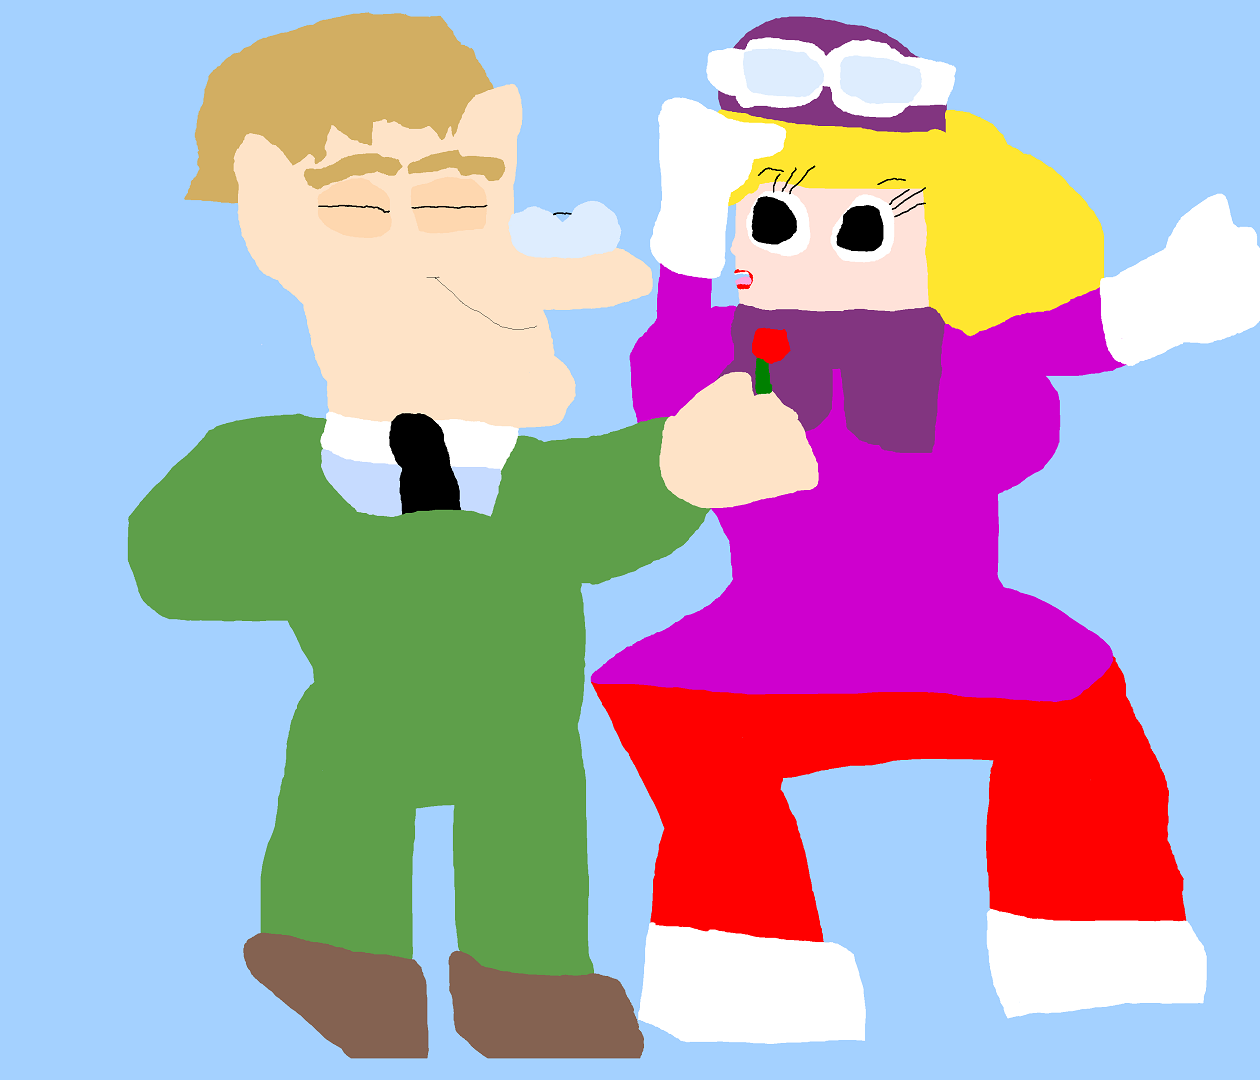 Sly Sneekly Giving Penelope Pitstop A Rose Ms Paint by Falconlobo